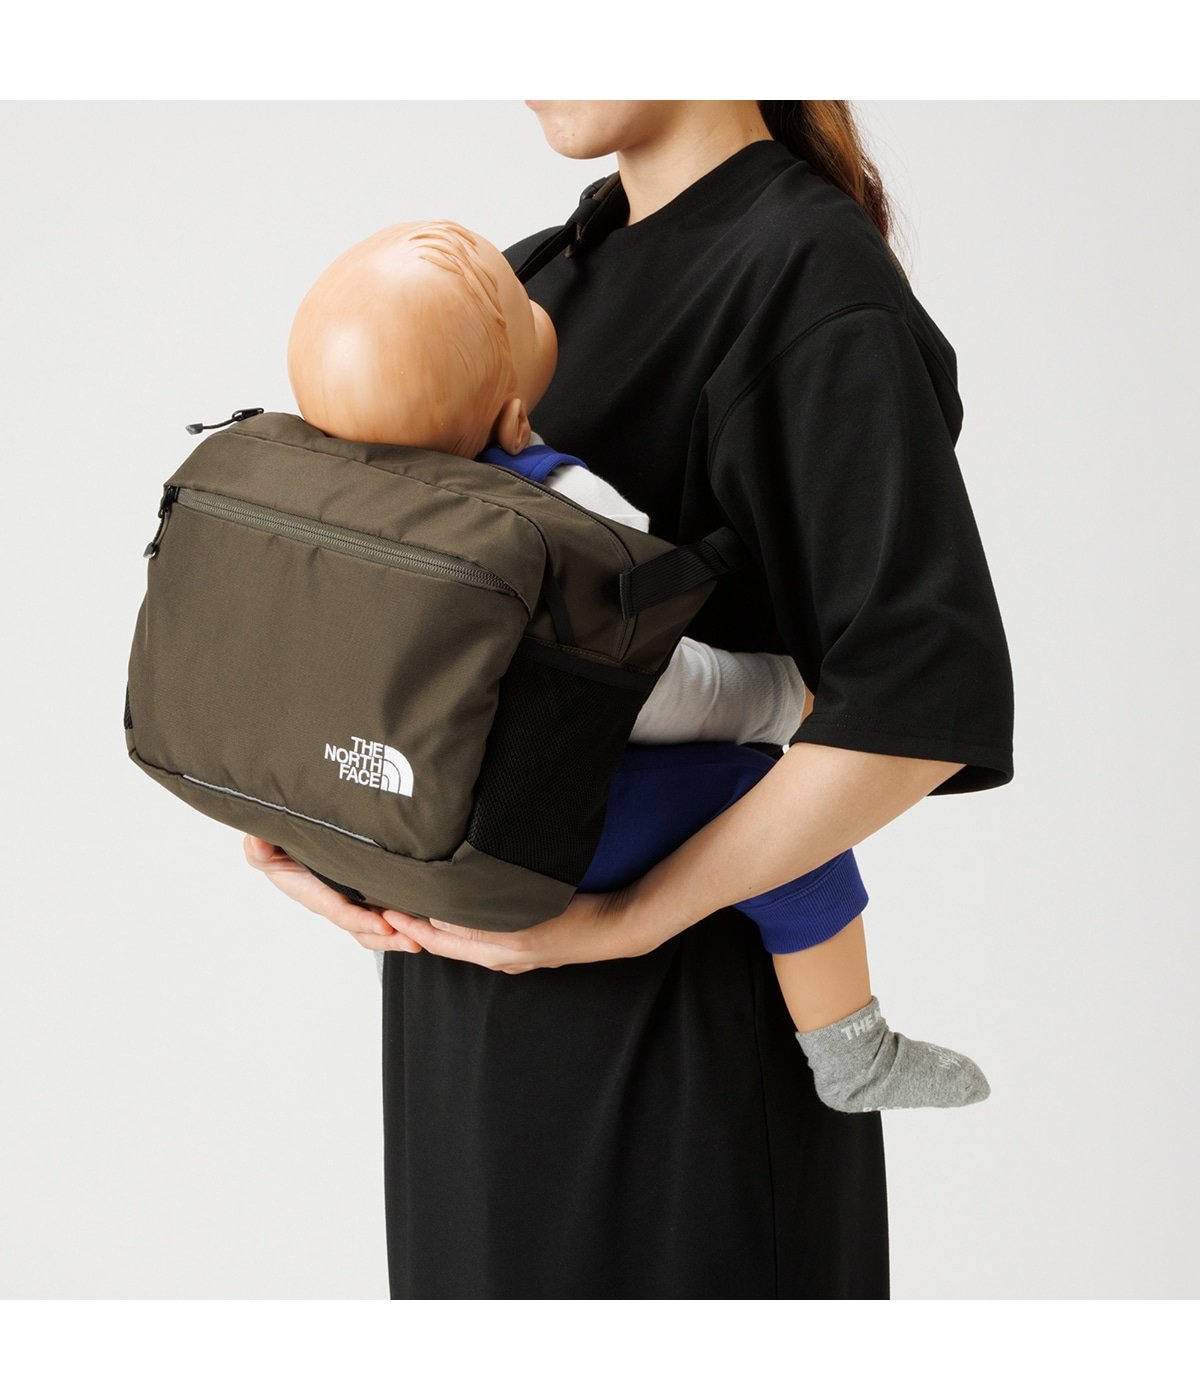 Baby Sling Bag | THE NORTH FACE(ザ ノースフェイス) / バッグ バッグ